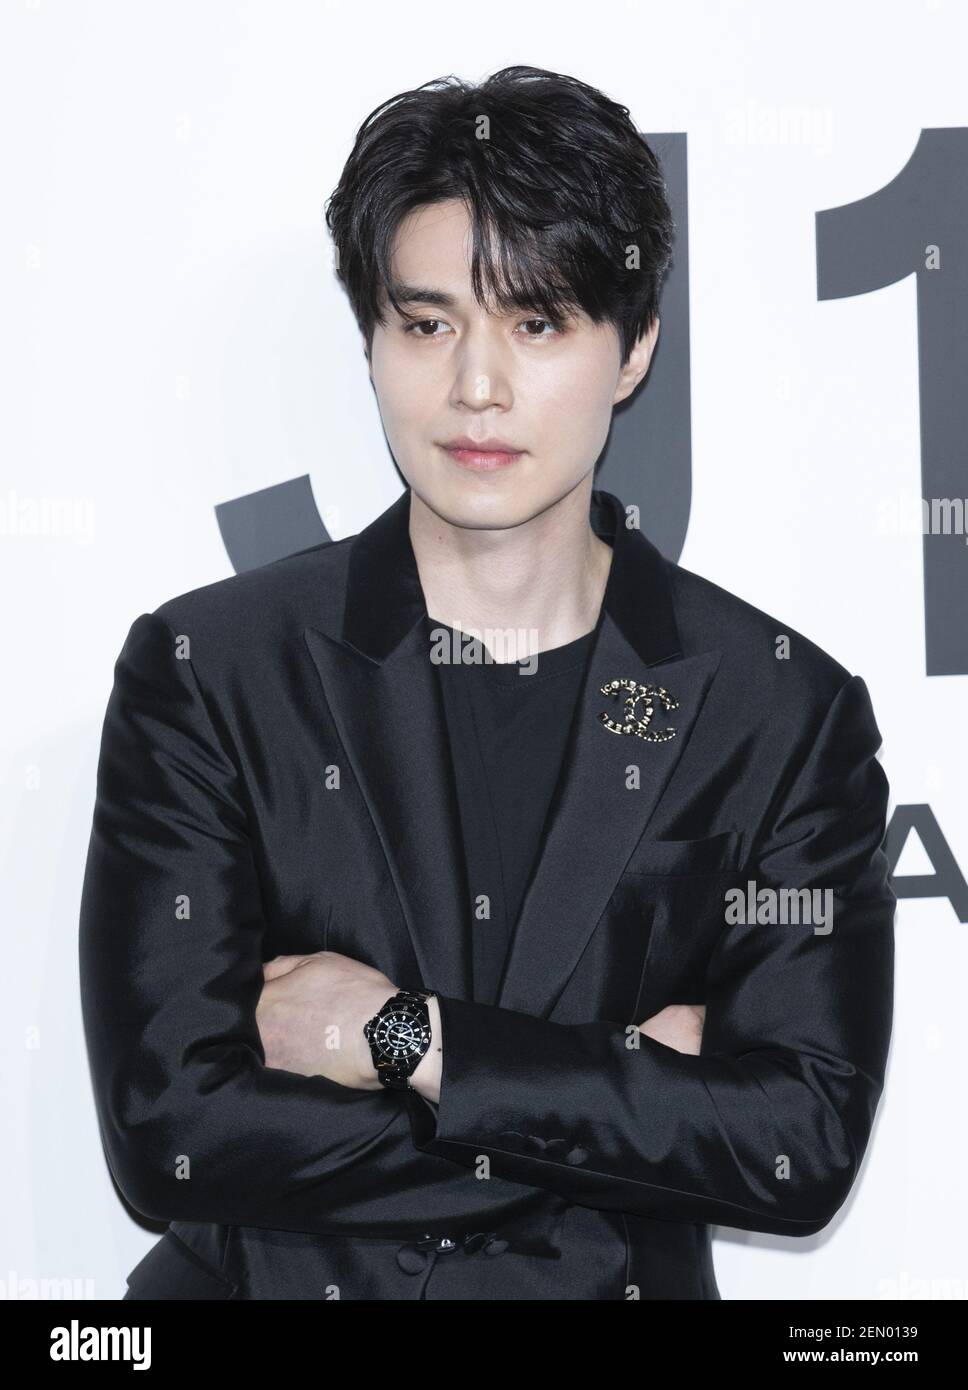 South Korean actor Lee Dong-wook, attends a photocall for the Fashion Brand  'Chanel The New J12' flag shop launching in Seoul, South Korea on May 8,  2019. (Photo by Lee Young-ho/Sipa USA